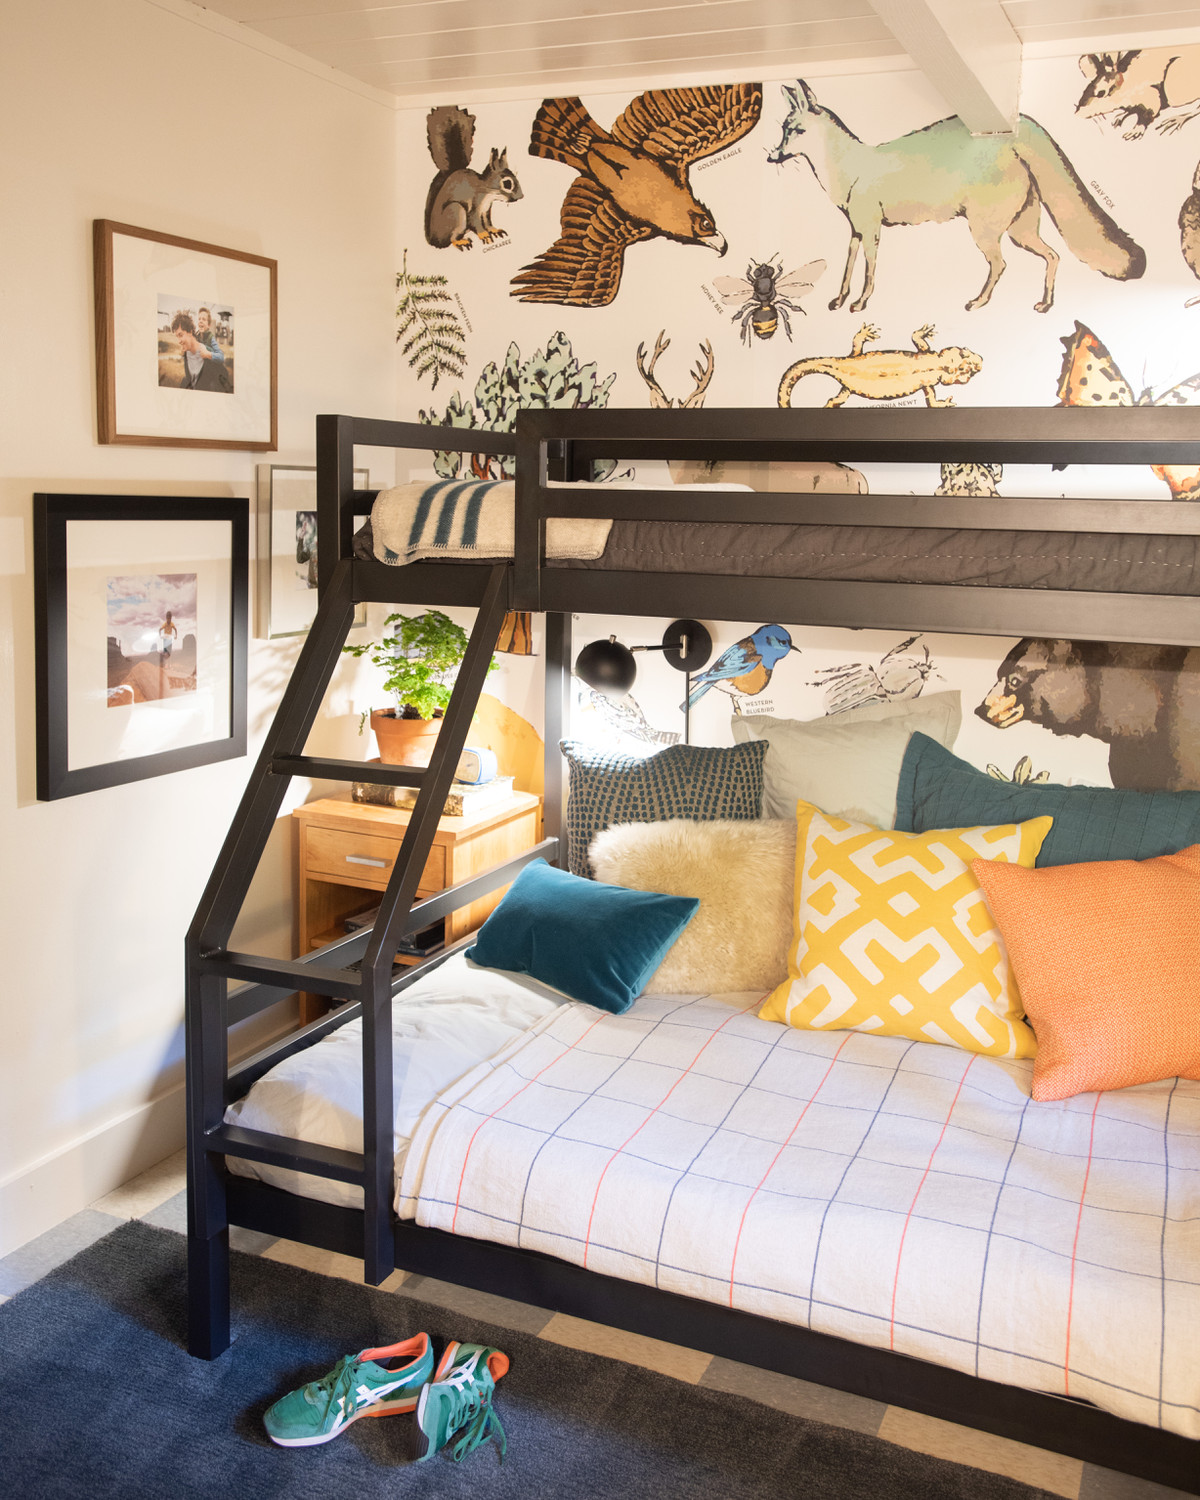 Kids Guest Room Ideas
 The Treehouse Guest Room Boys Room Ideas